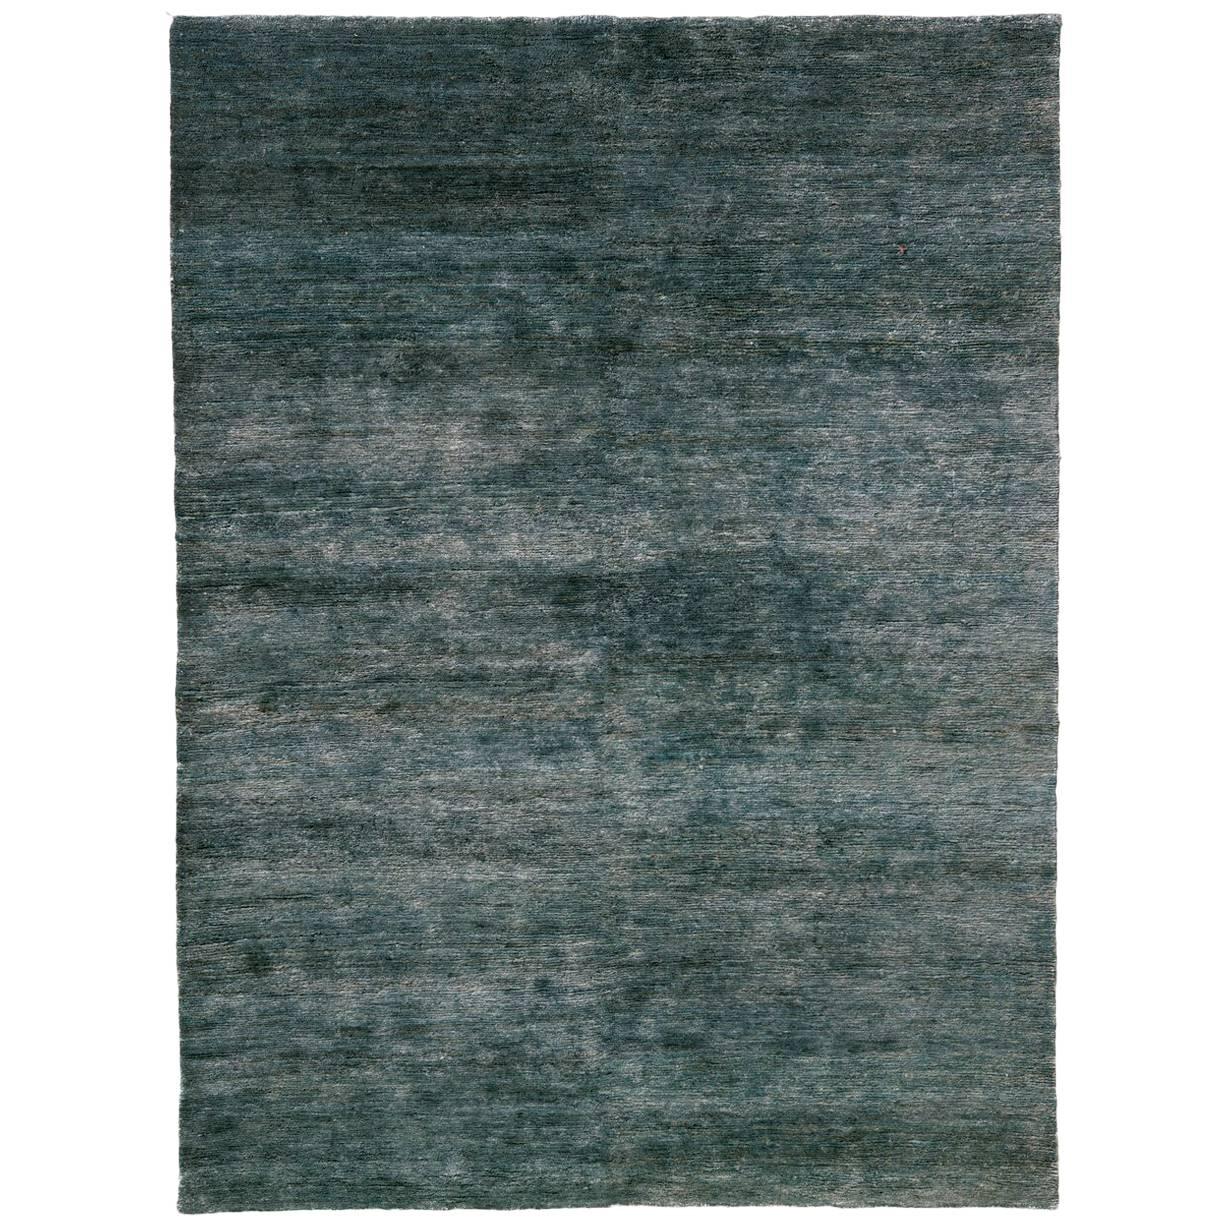 Noche Blue Green Hand-Knotted Jute Rug by Nani Marquina, Ariadna Miquel, Small For Sale